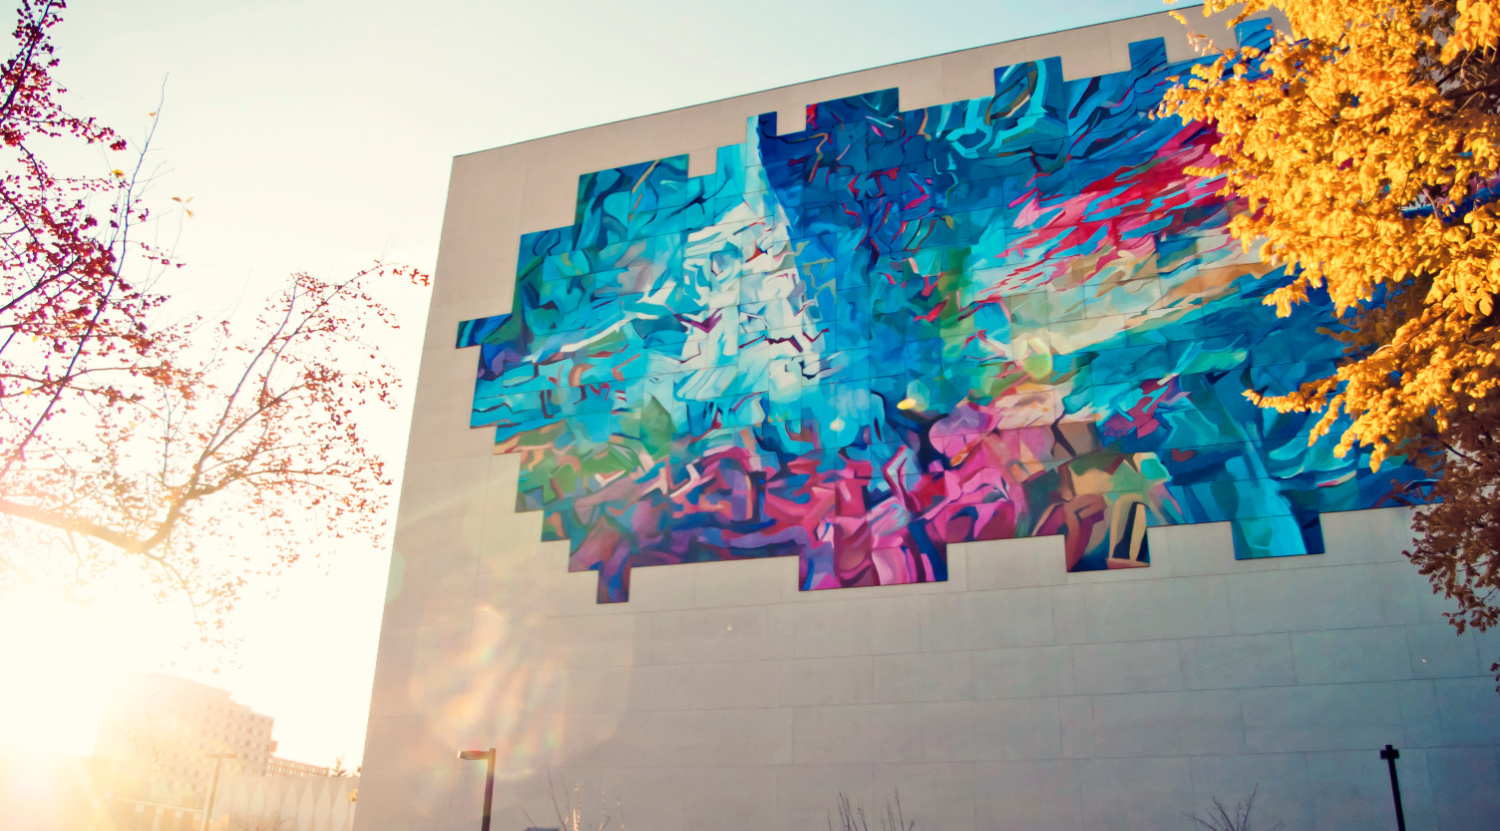 Exterior shot of the Education North building including a mural and autumn trees